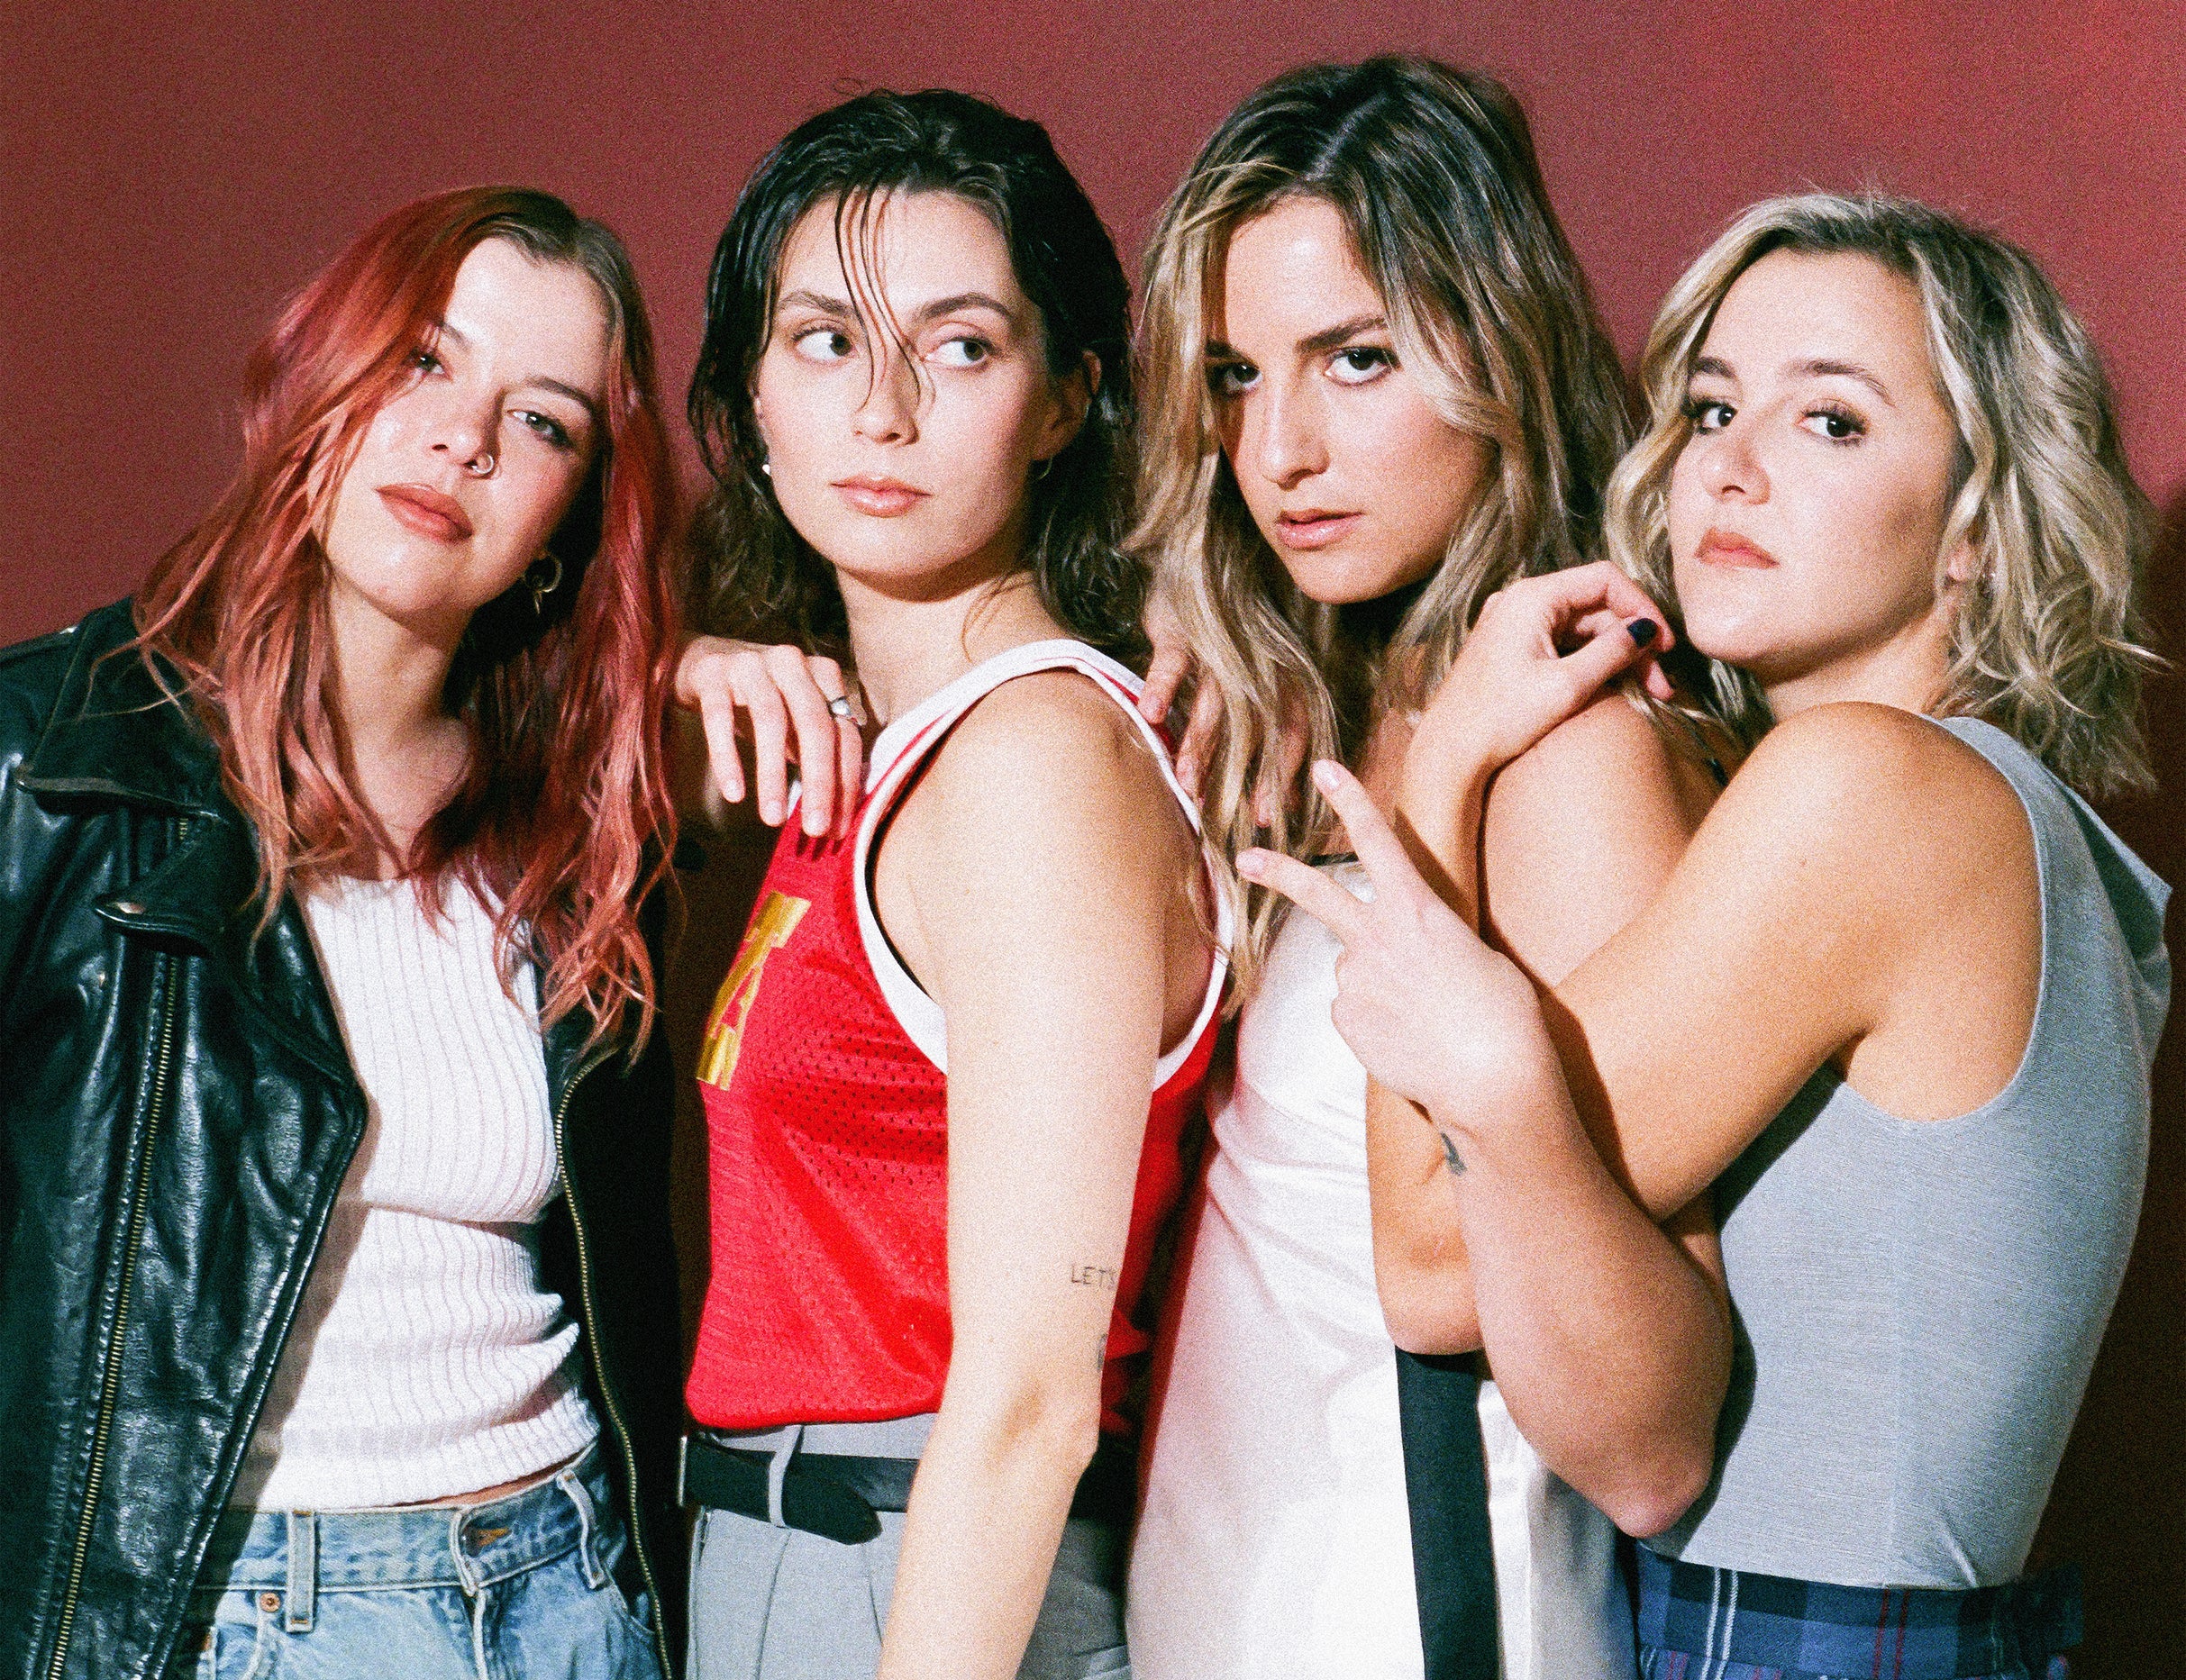 The Beaches-Blame My Ex Tour presale password for show tickets in Madison, WI (Majestic Theatre)